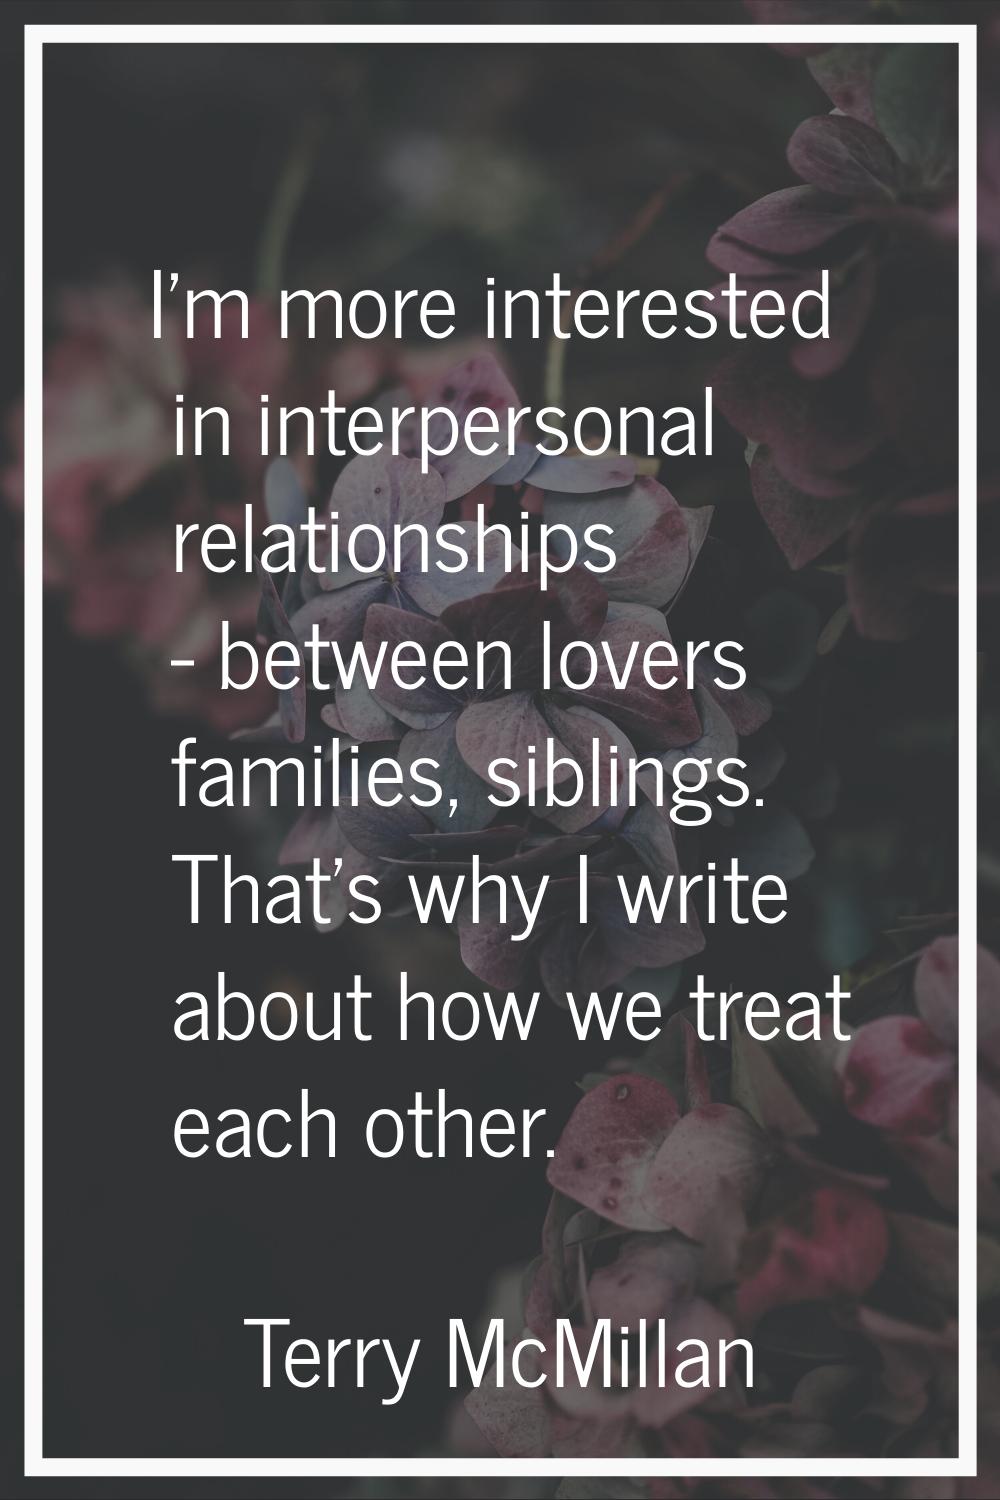 I'm more interested in interpersonal relationships - between lovers families, siblings. That's why 